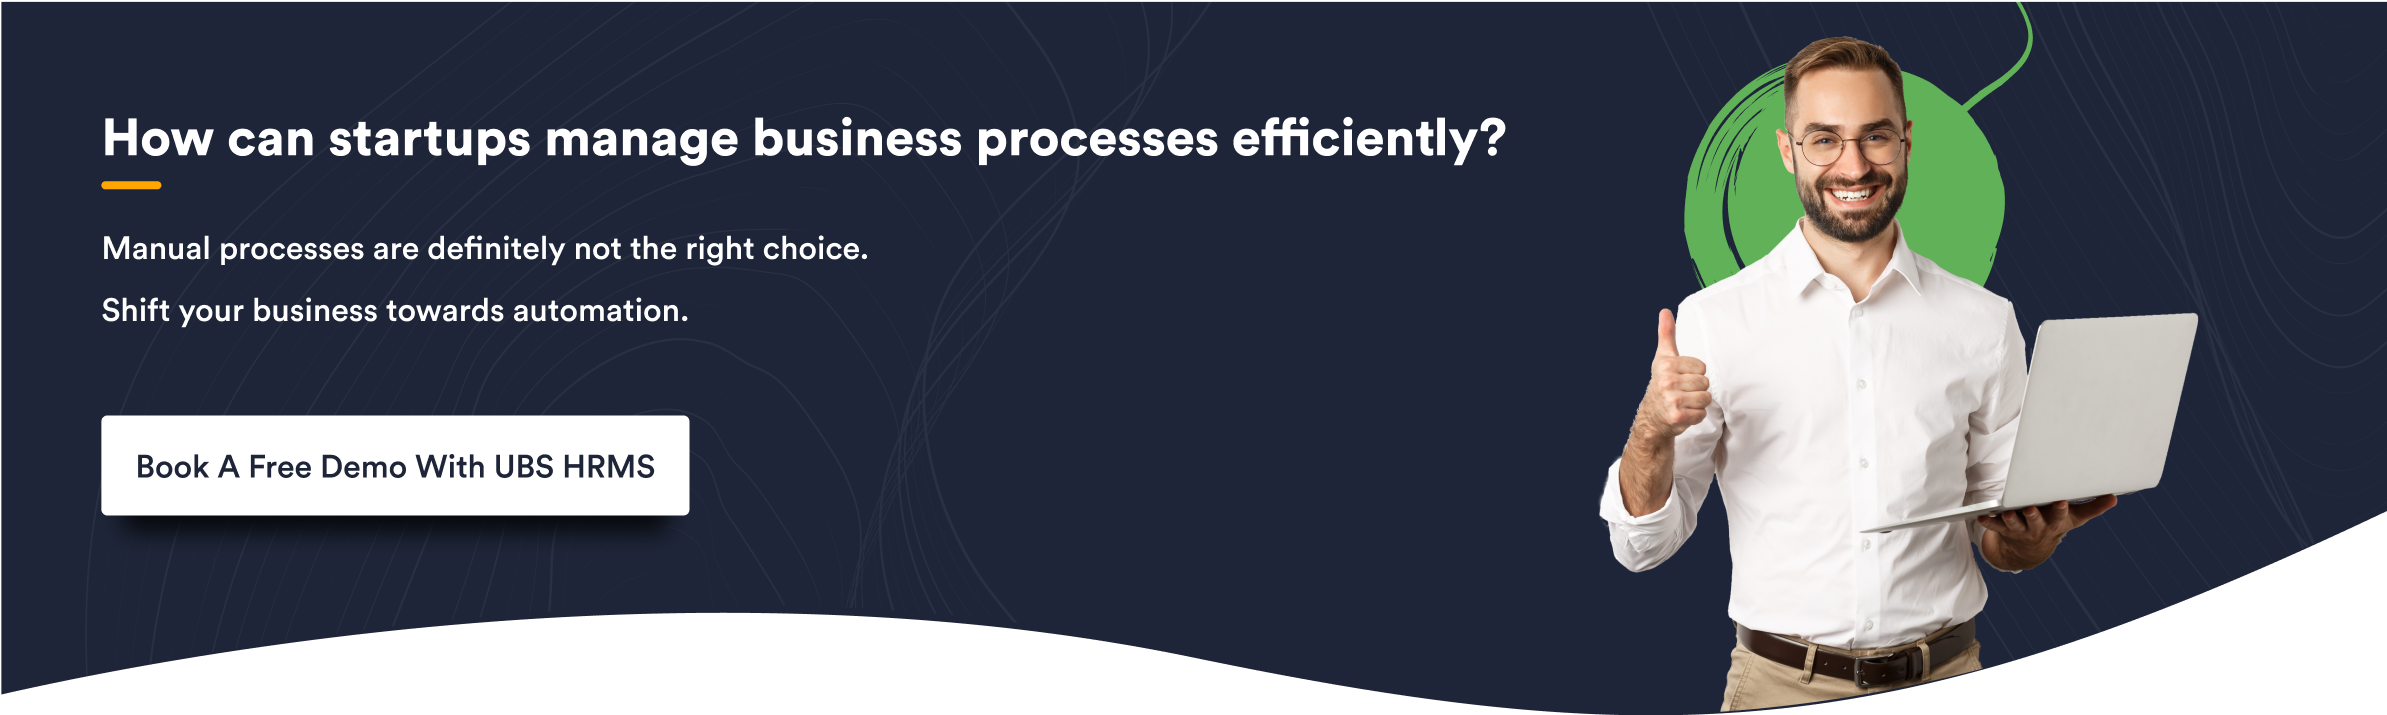 How can startups manage business processes efficiently